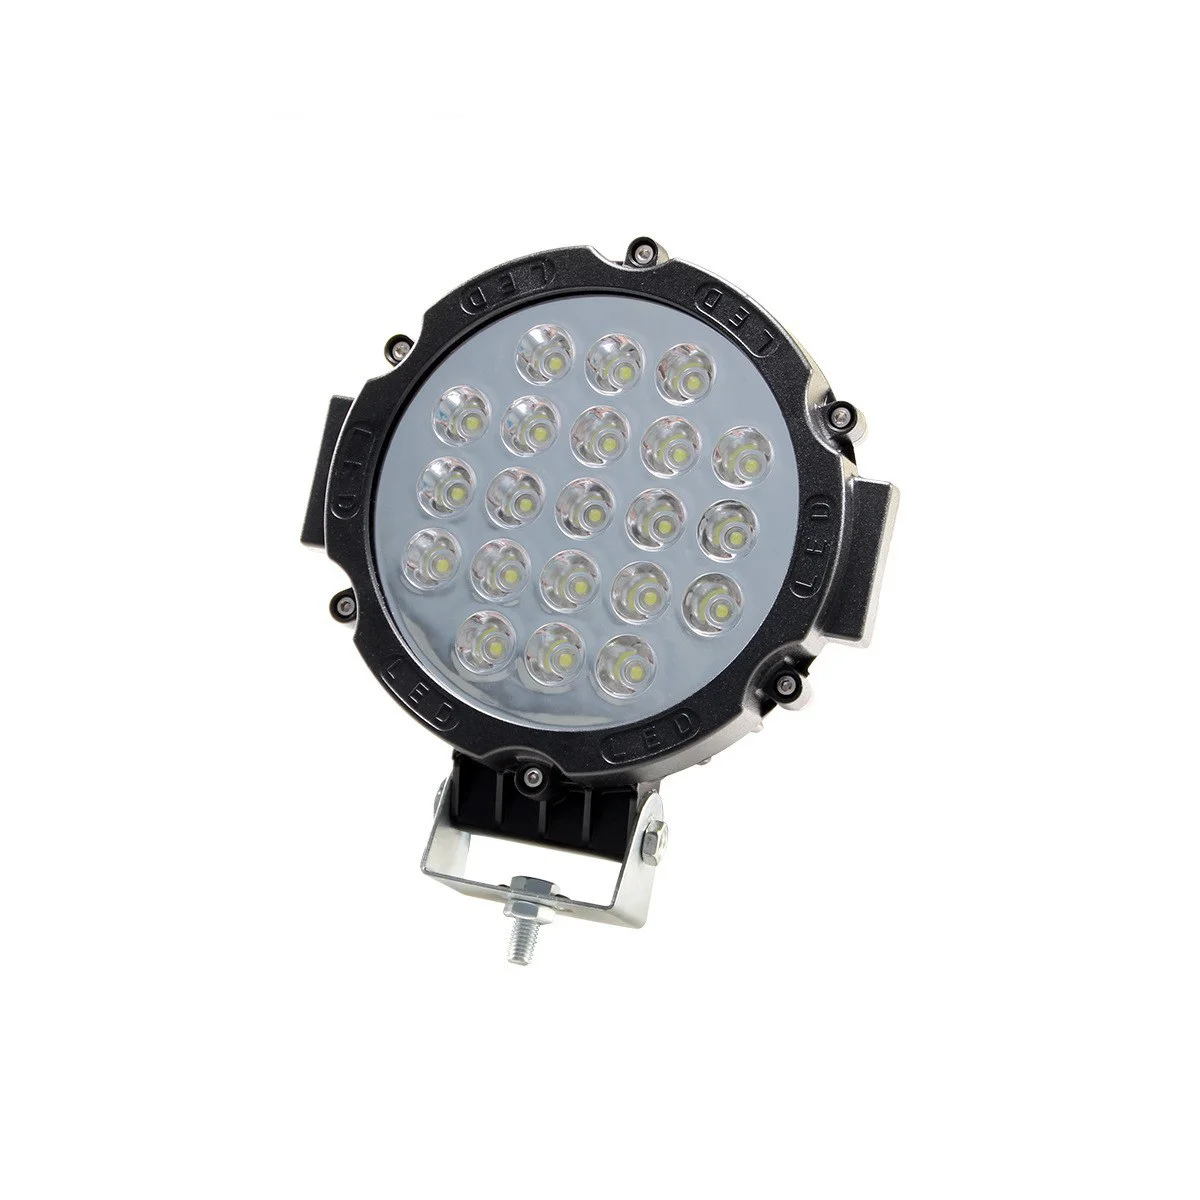 

Round Work Lights Headlights for Cars SUV Mechanical Car Agricultural Vehicles Truck